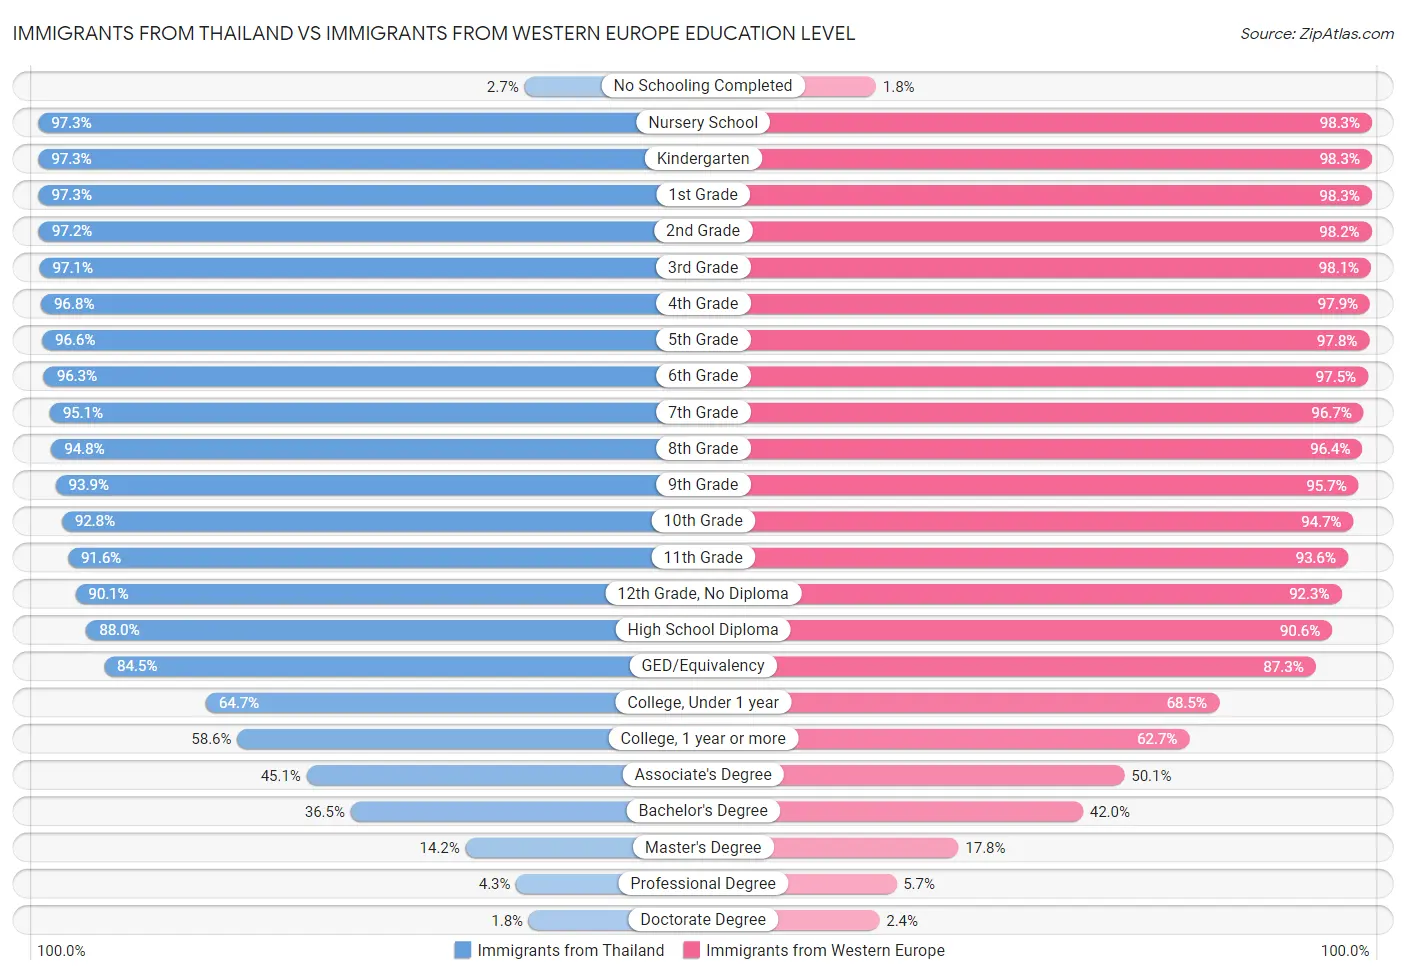 Immigrants from Thailand vs Immigrants from Western Europe Education Level